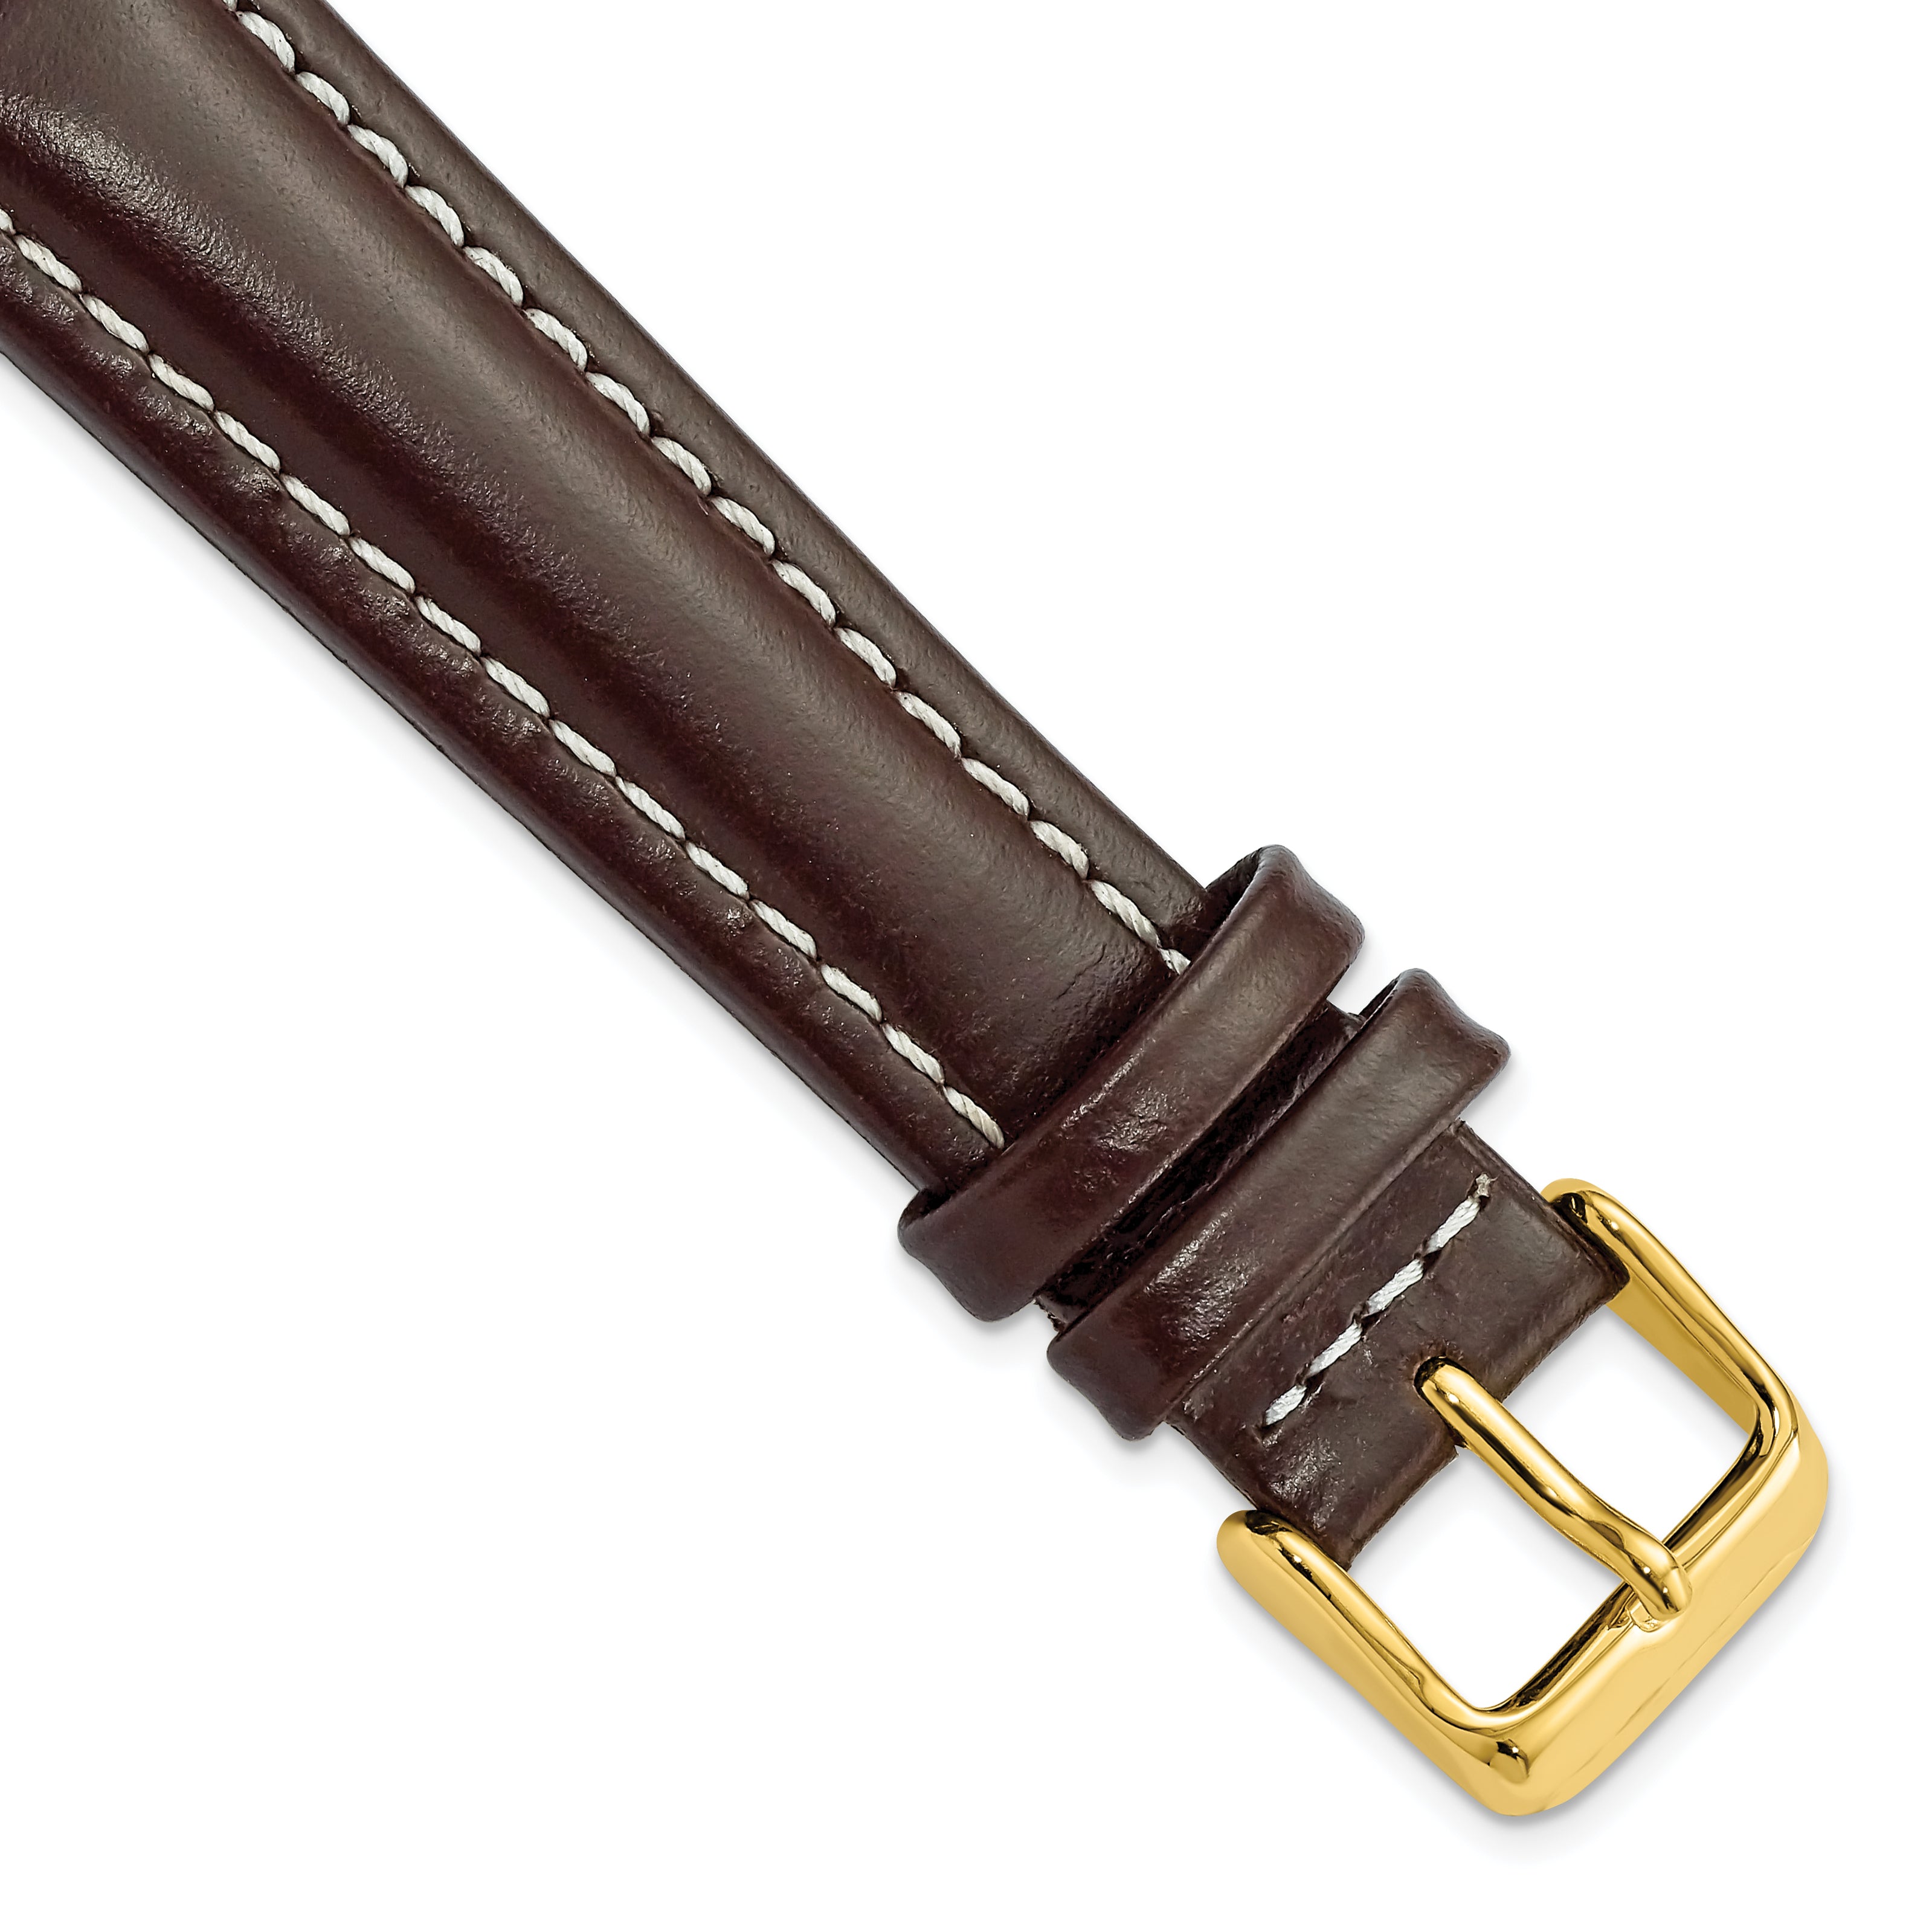 DeBeer 19mm Dark Brown Oil-tanned Leather with White Stitching and Gold-tone Buckle 7.5 inch Watch Band